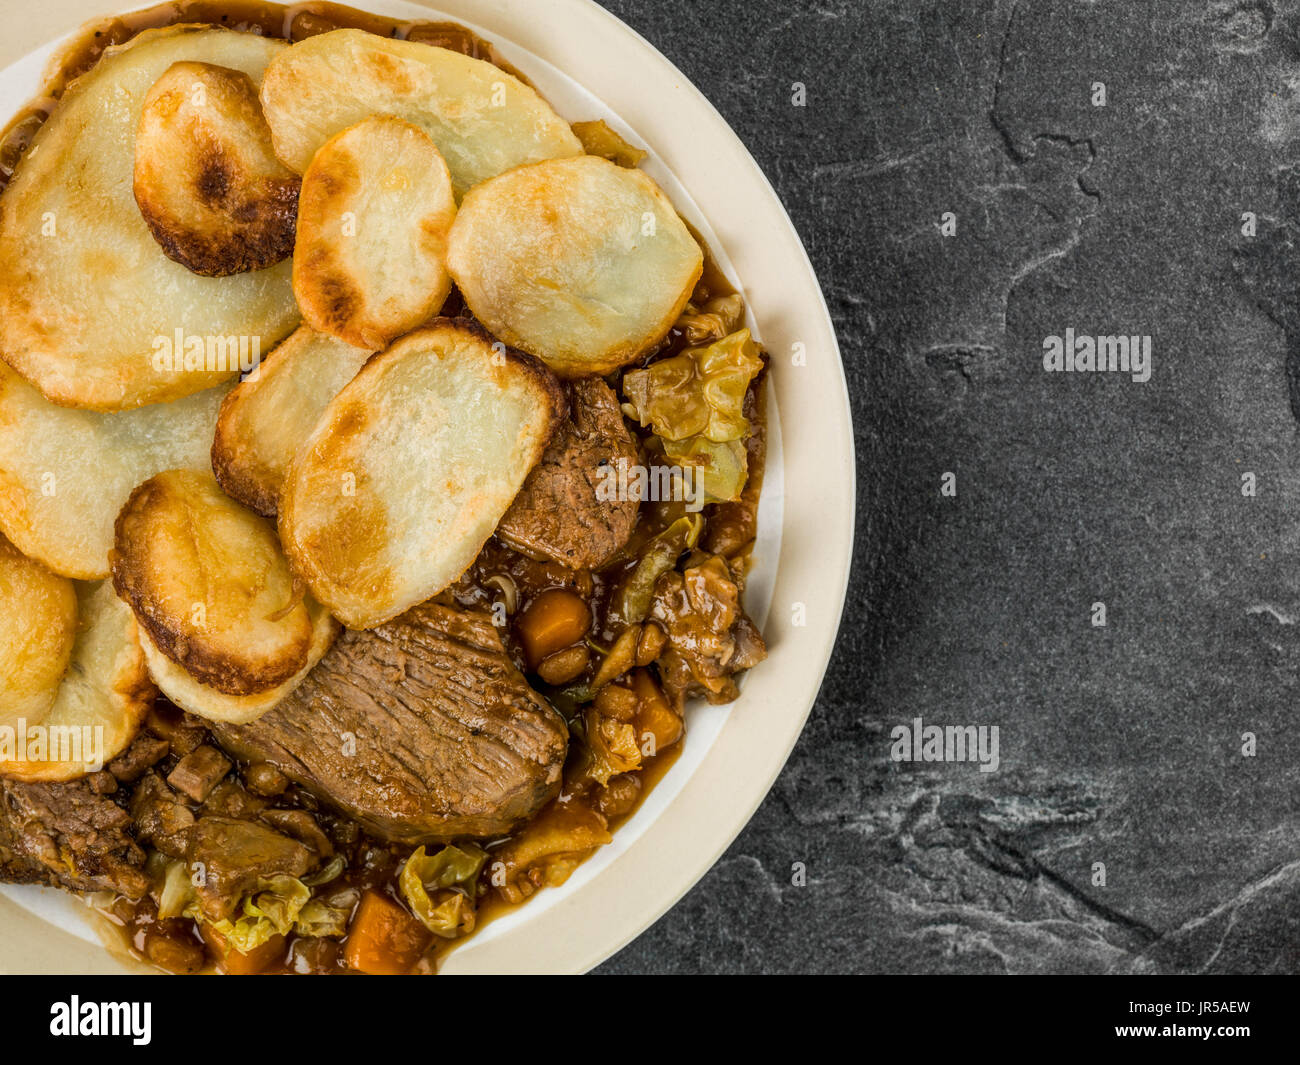 Lamb Hotpot With Sliced Potatoes and Onion Gravy Against a B;ack Slate Tile Background Stock Photo